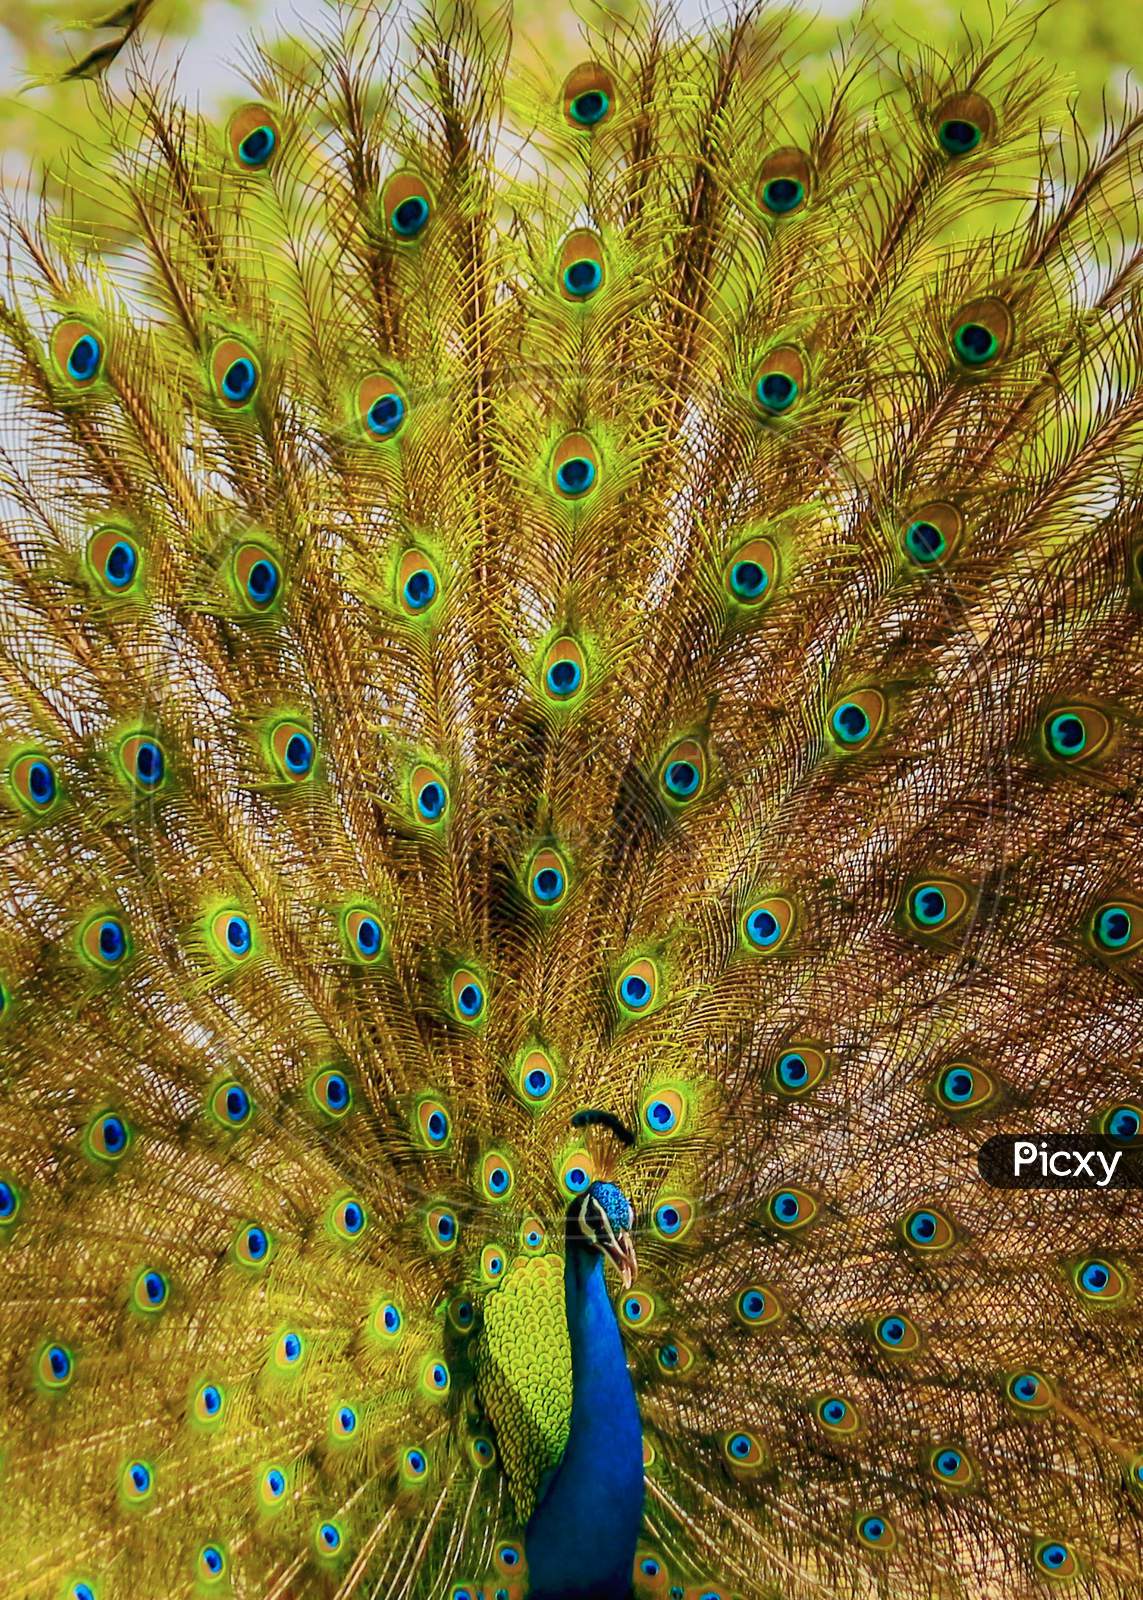 Peacock With Feathers Opened Dancing Forming a Background